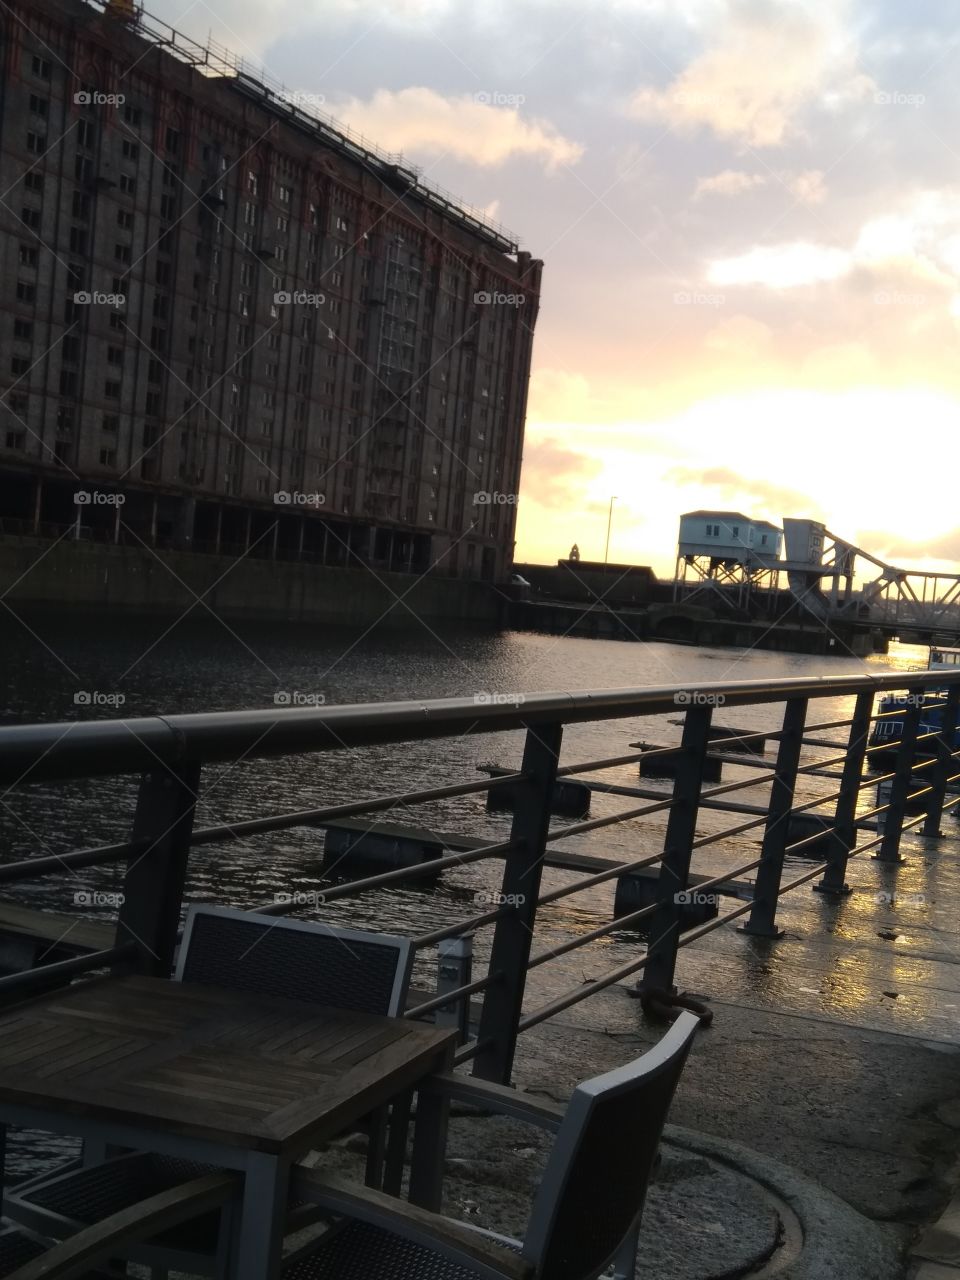 Taken on the docks at sunset: the reflection of the water and the light hitting the puddles with the buildings in the background added depth.